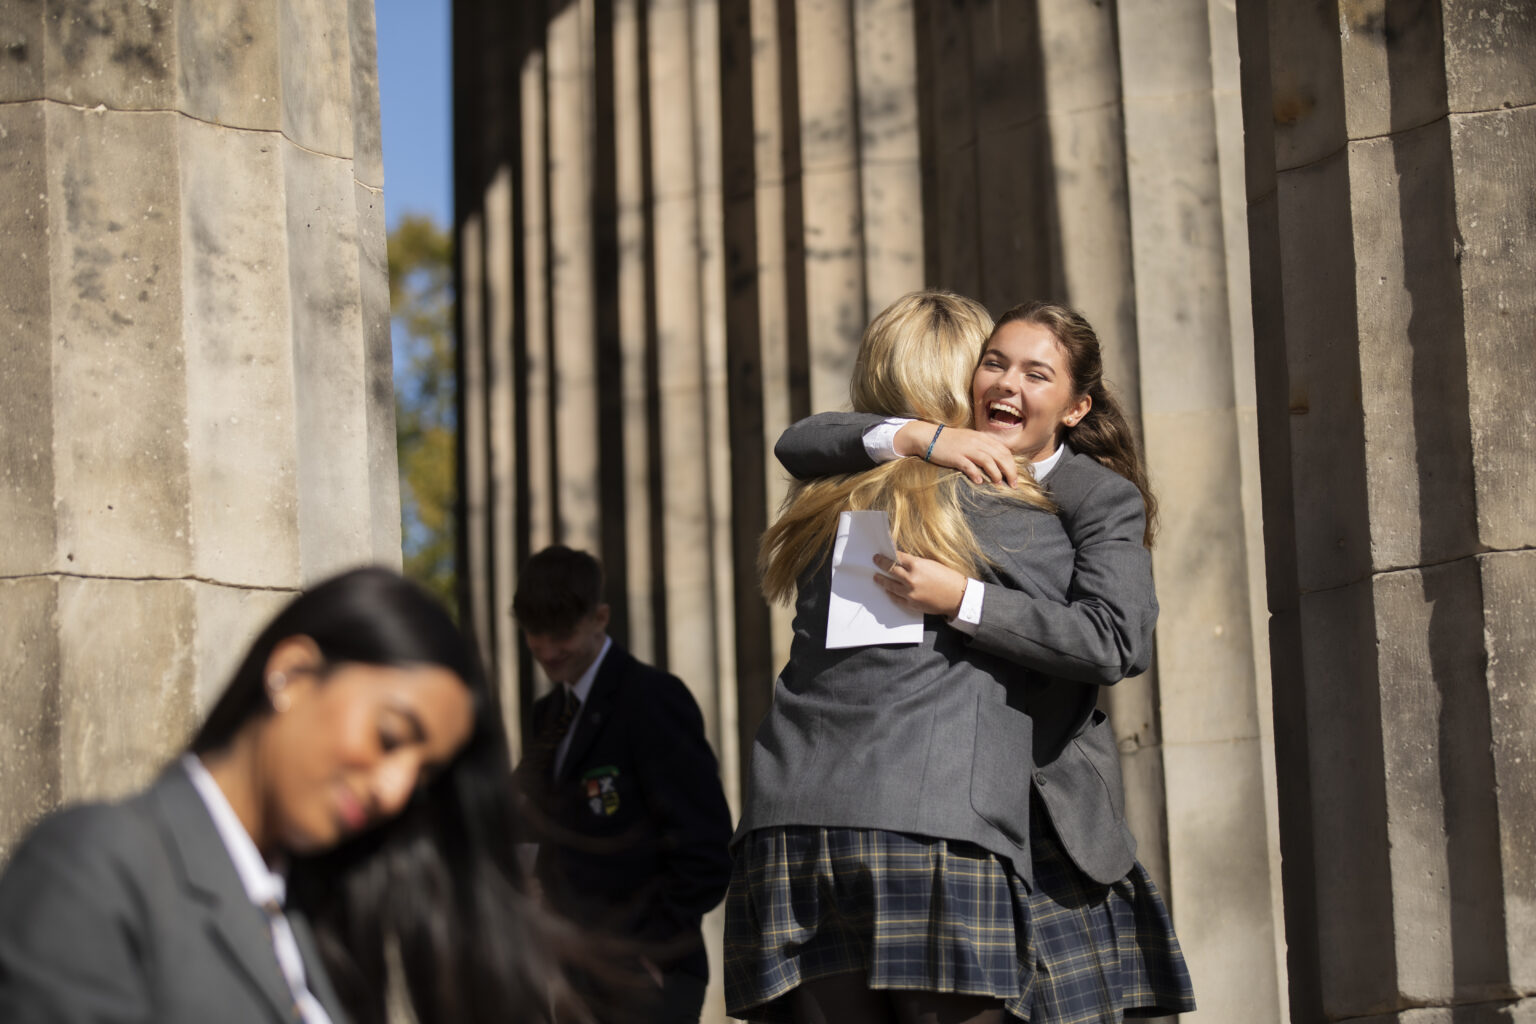 Believing. Pupils hugging each over and celebrating with documents in hand, at front of school by pillars.